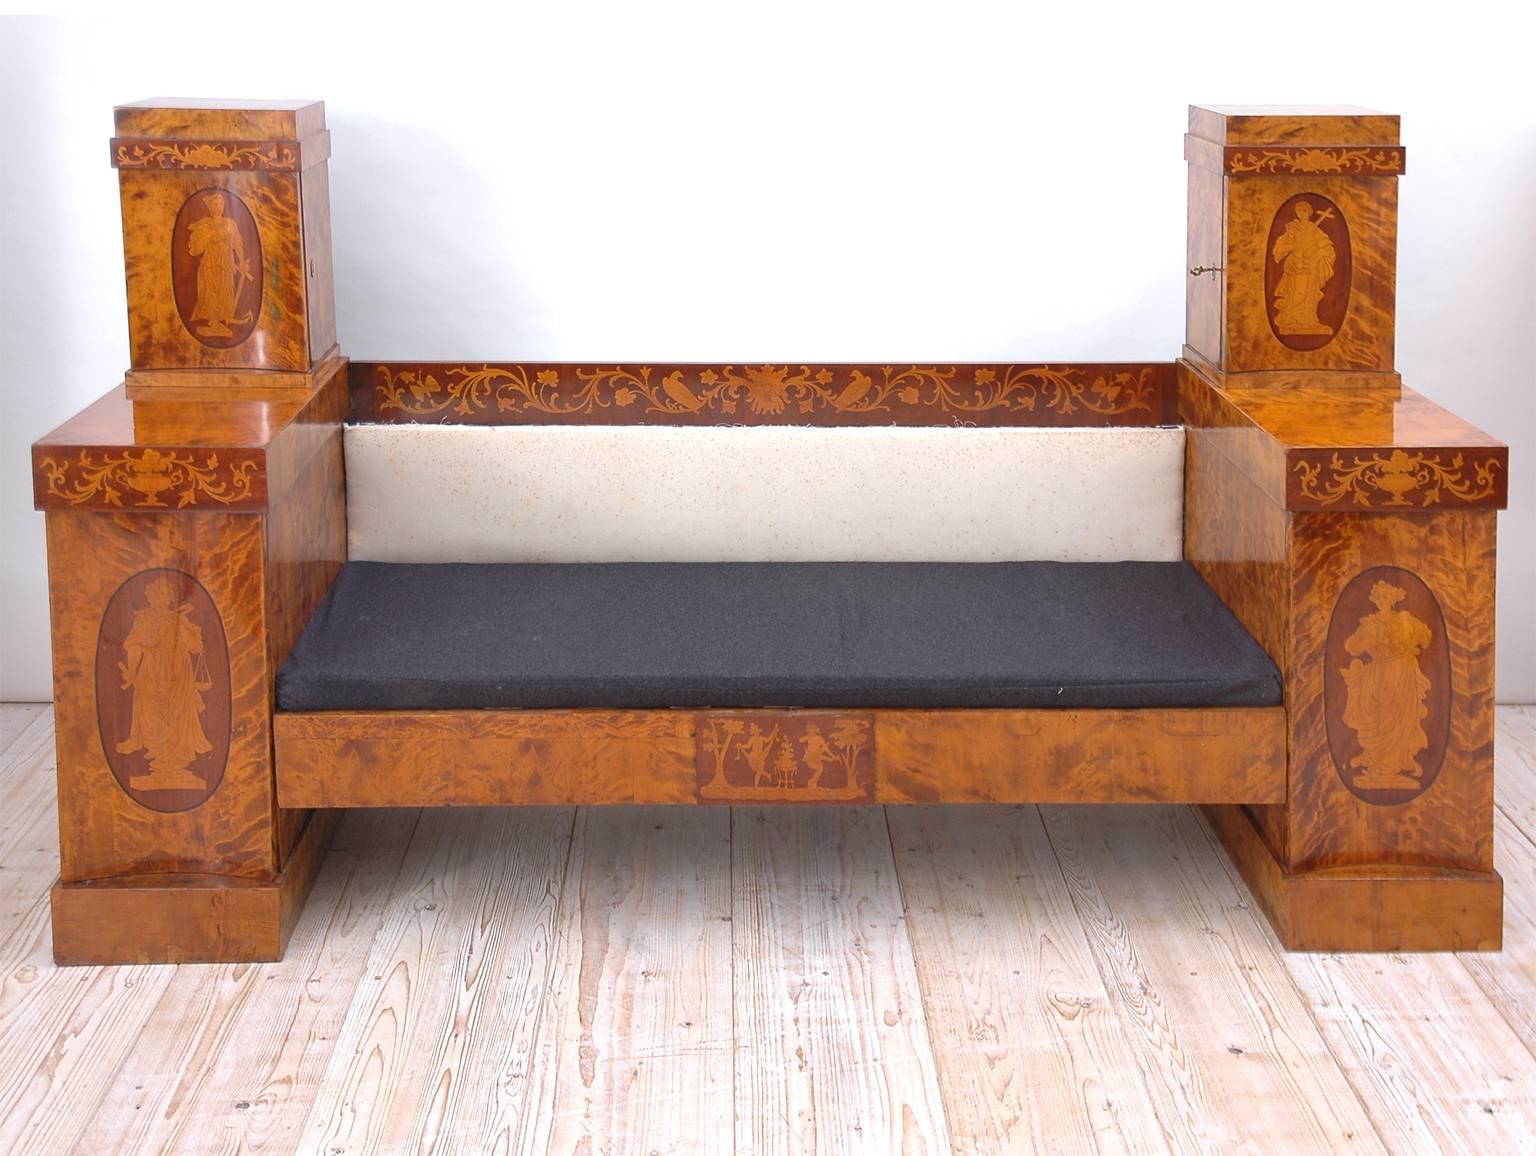 A Swedish Empire banquette/sofa in birch with marquetry embellishments which include foliage and urns and line-inlaid figures of the four cardinal virtues: Prudence, Justice, Fortitude and Temperance. Lower cabinets open to reveal drawers, while top